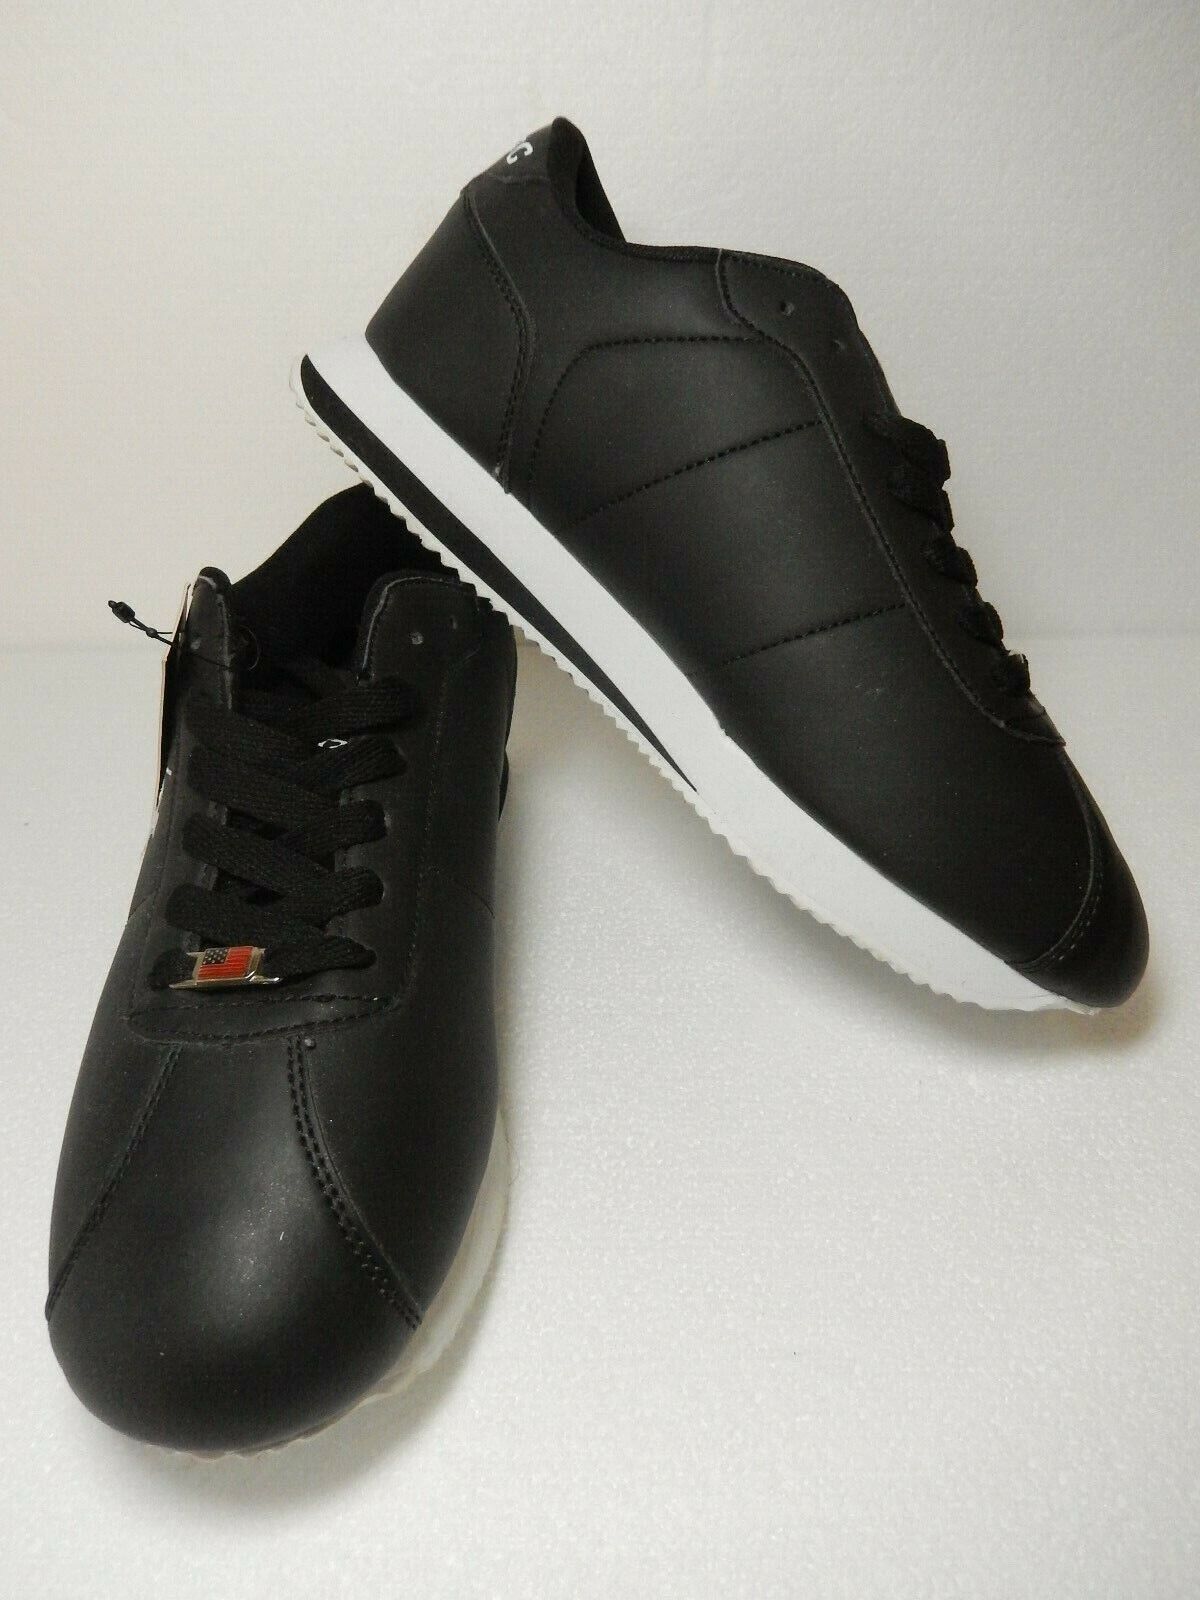 Beverly Hills Polo Club Mens Fashion Sneakers Leather Casual Walking Shoes 7.5D